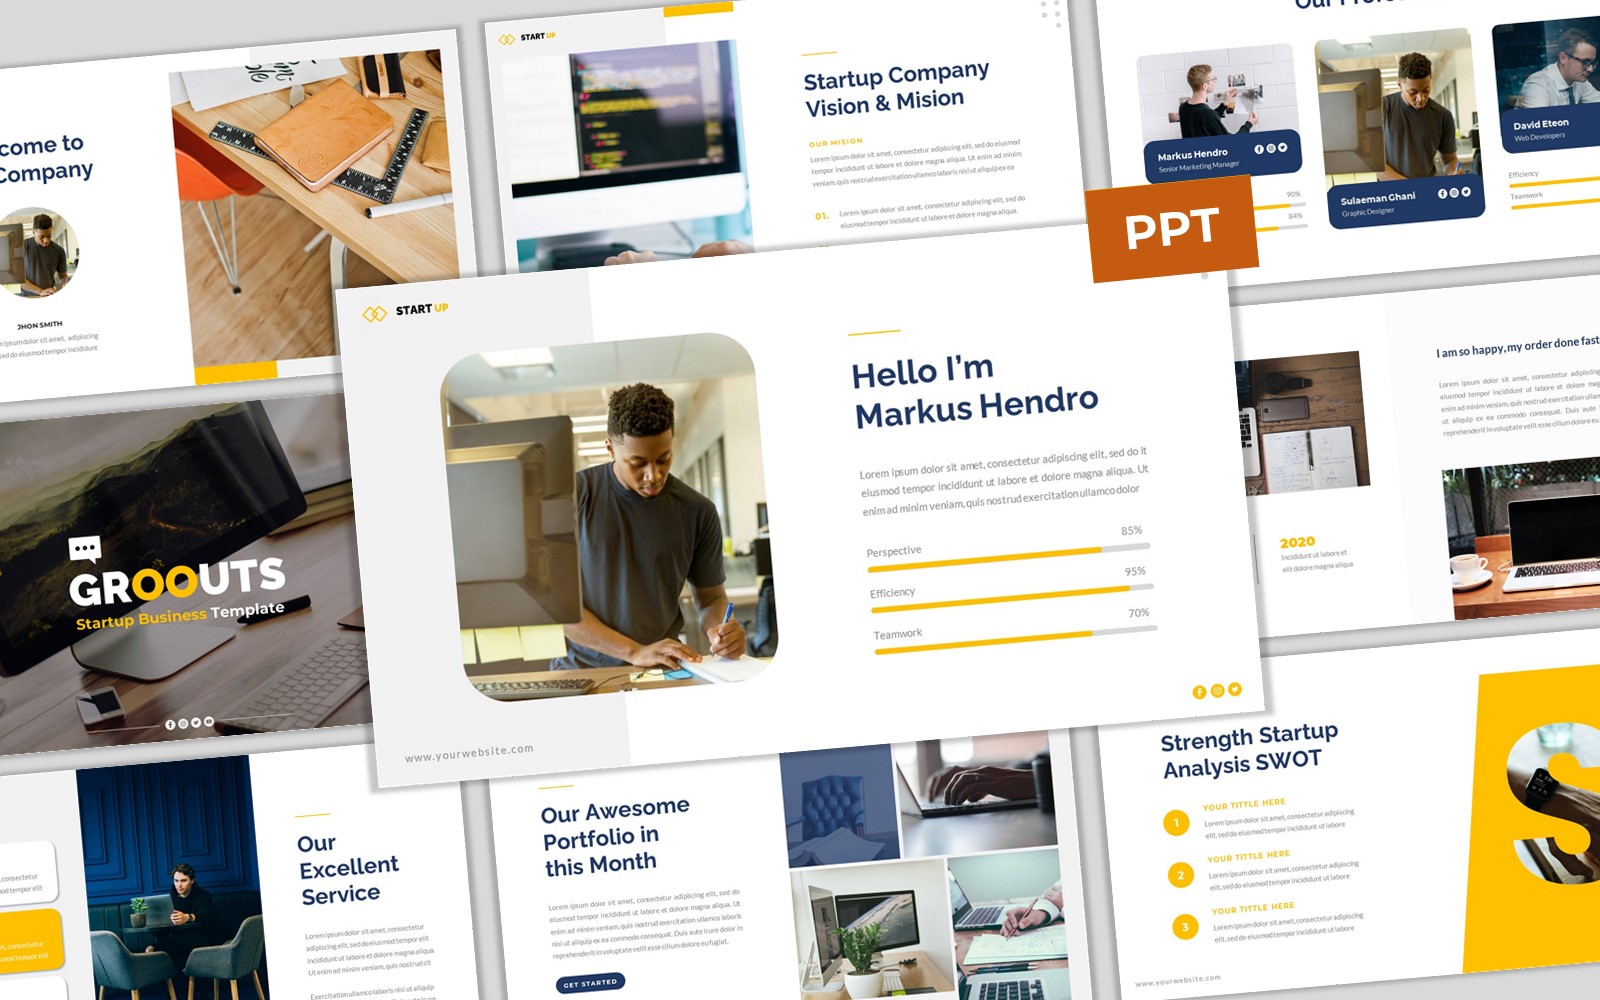 Groouts - Start Up Business PowerPoint Template